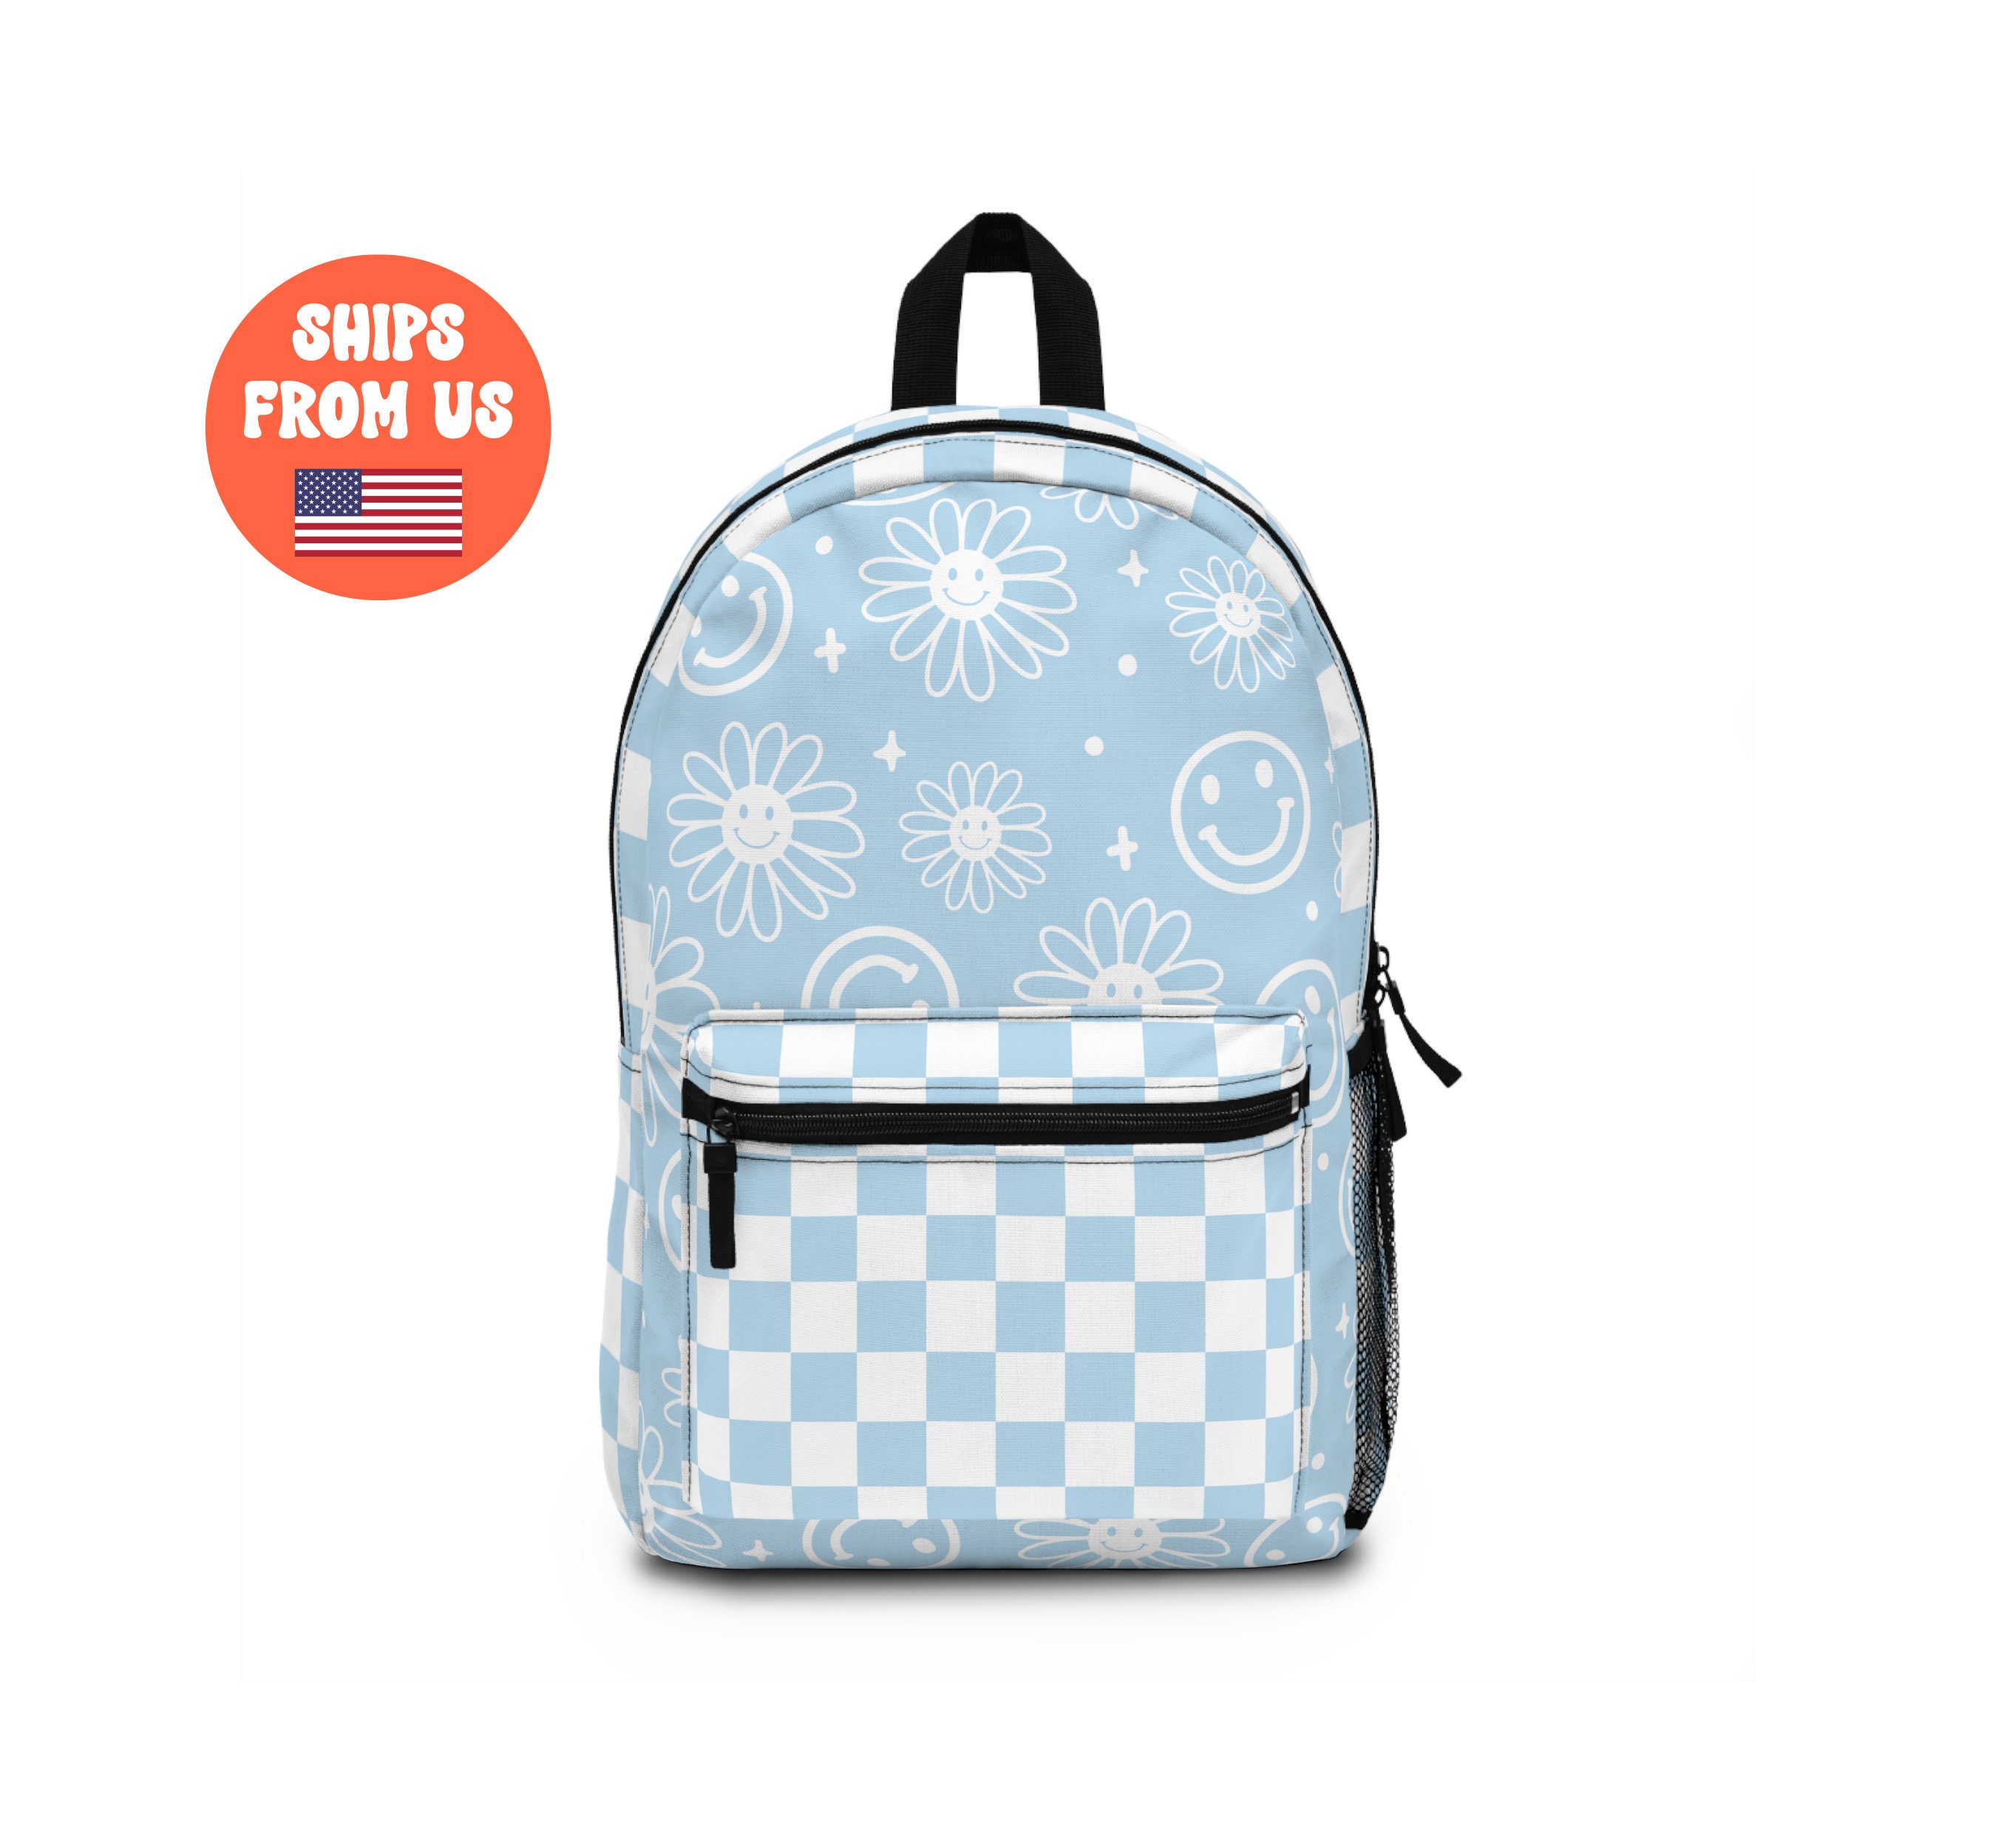 Stay Rad patch Checkered Backpack Beige White Kids and Adults